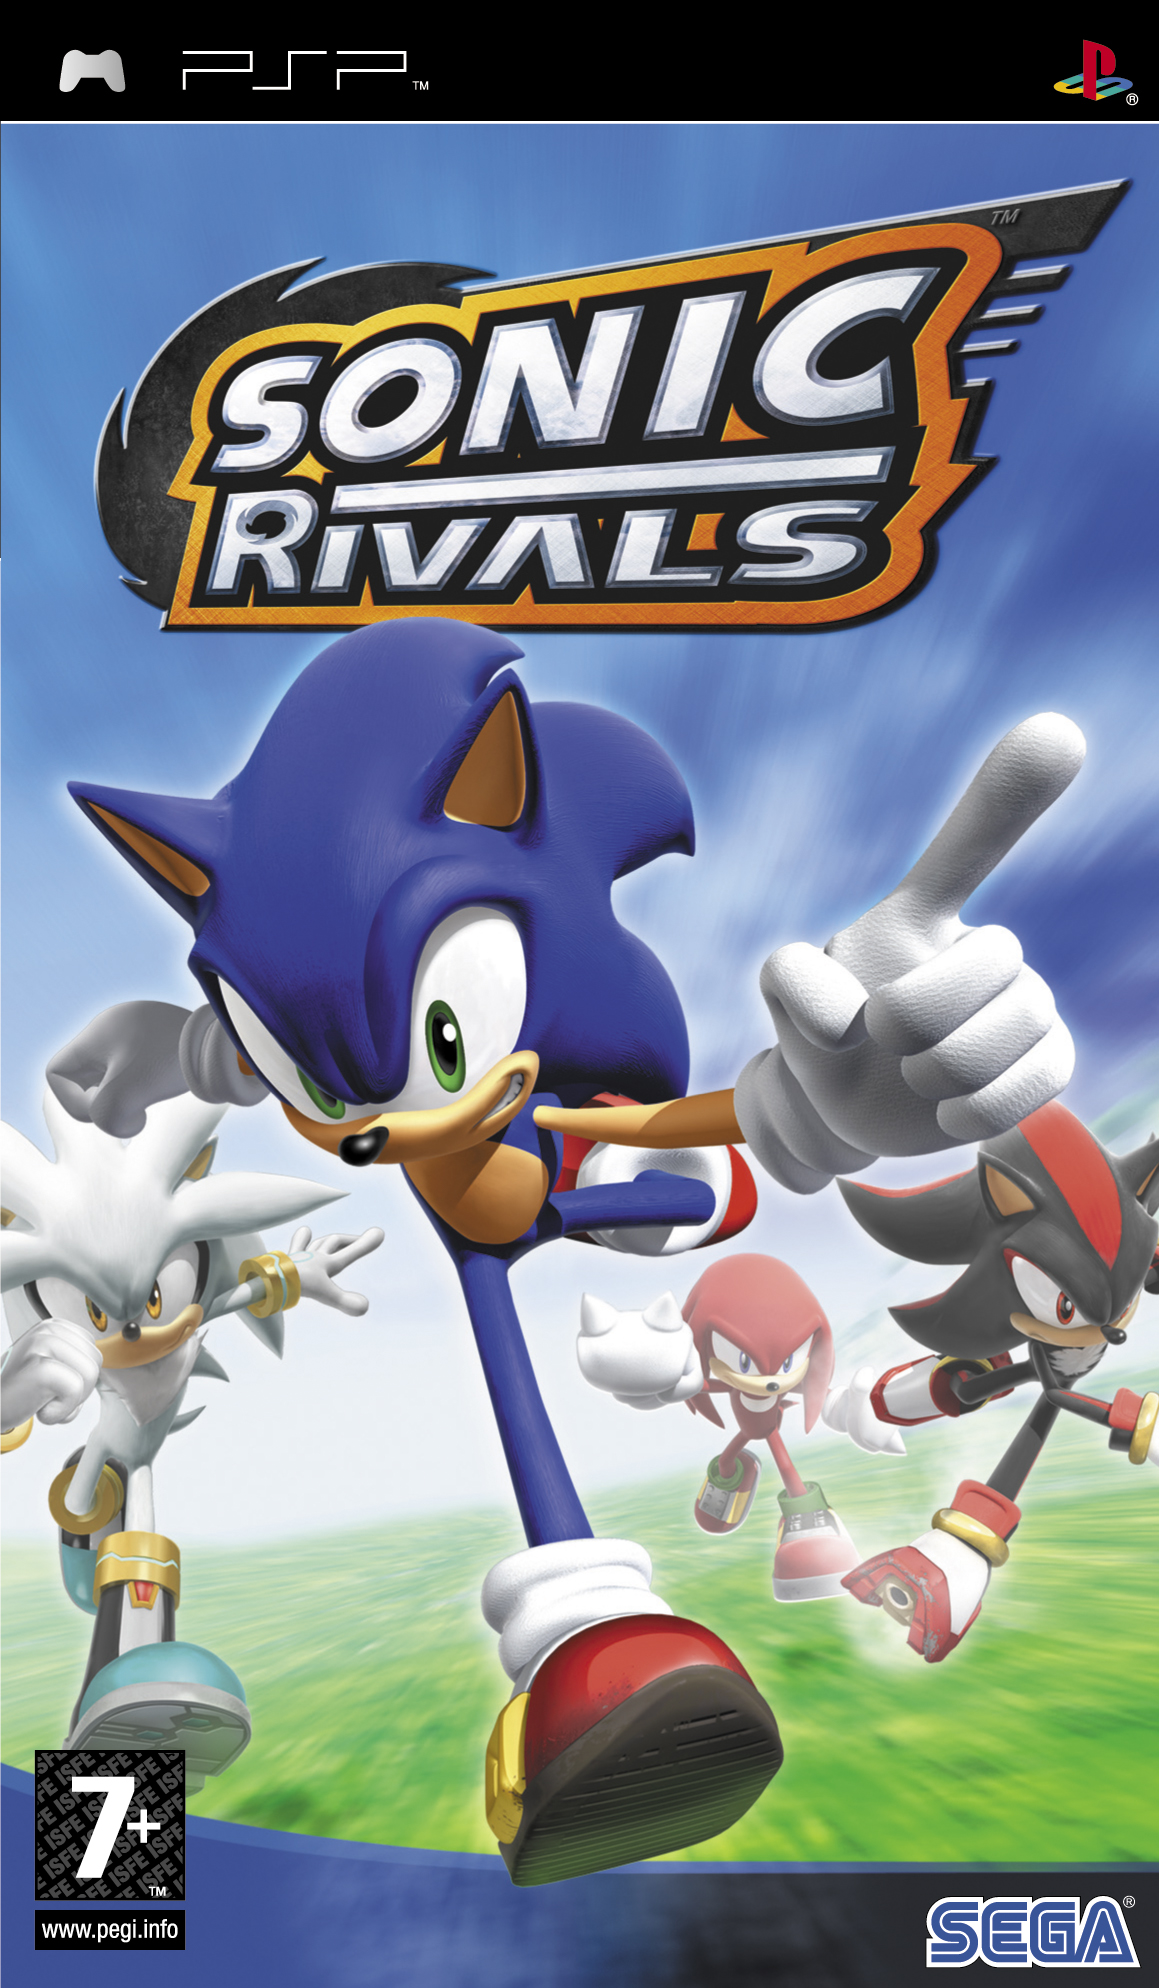 Official Art - Sonic Rivals - Last Minute Continue